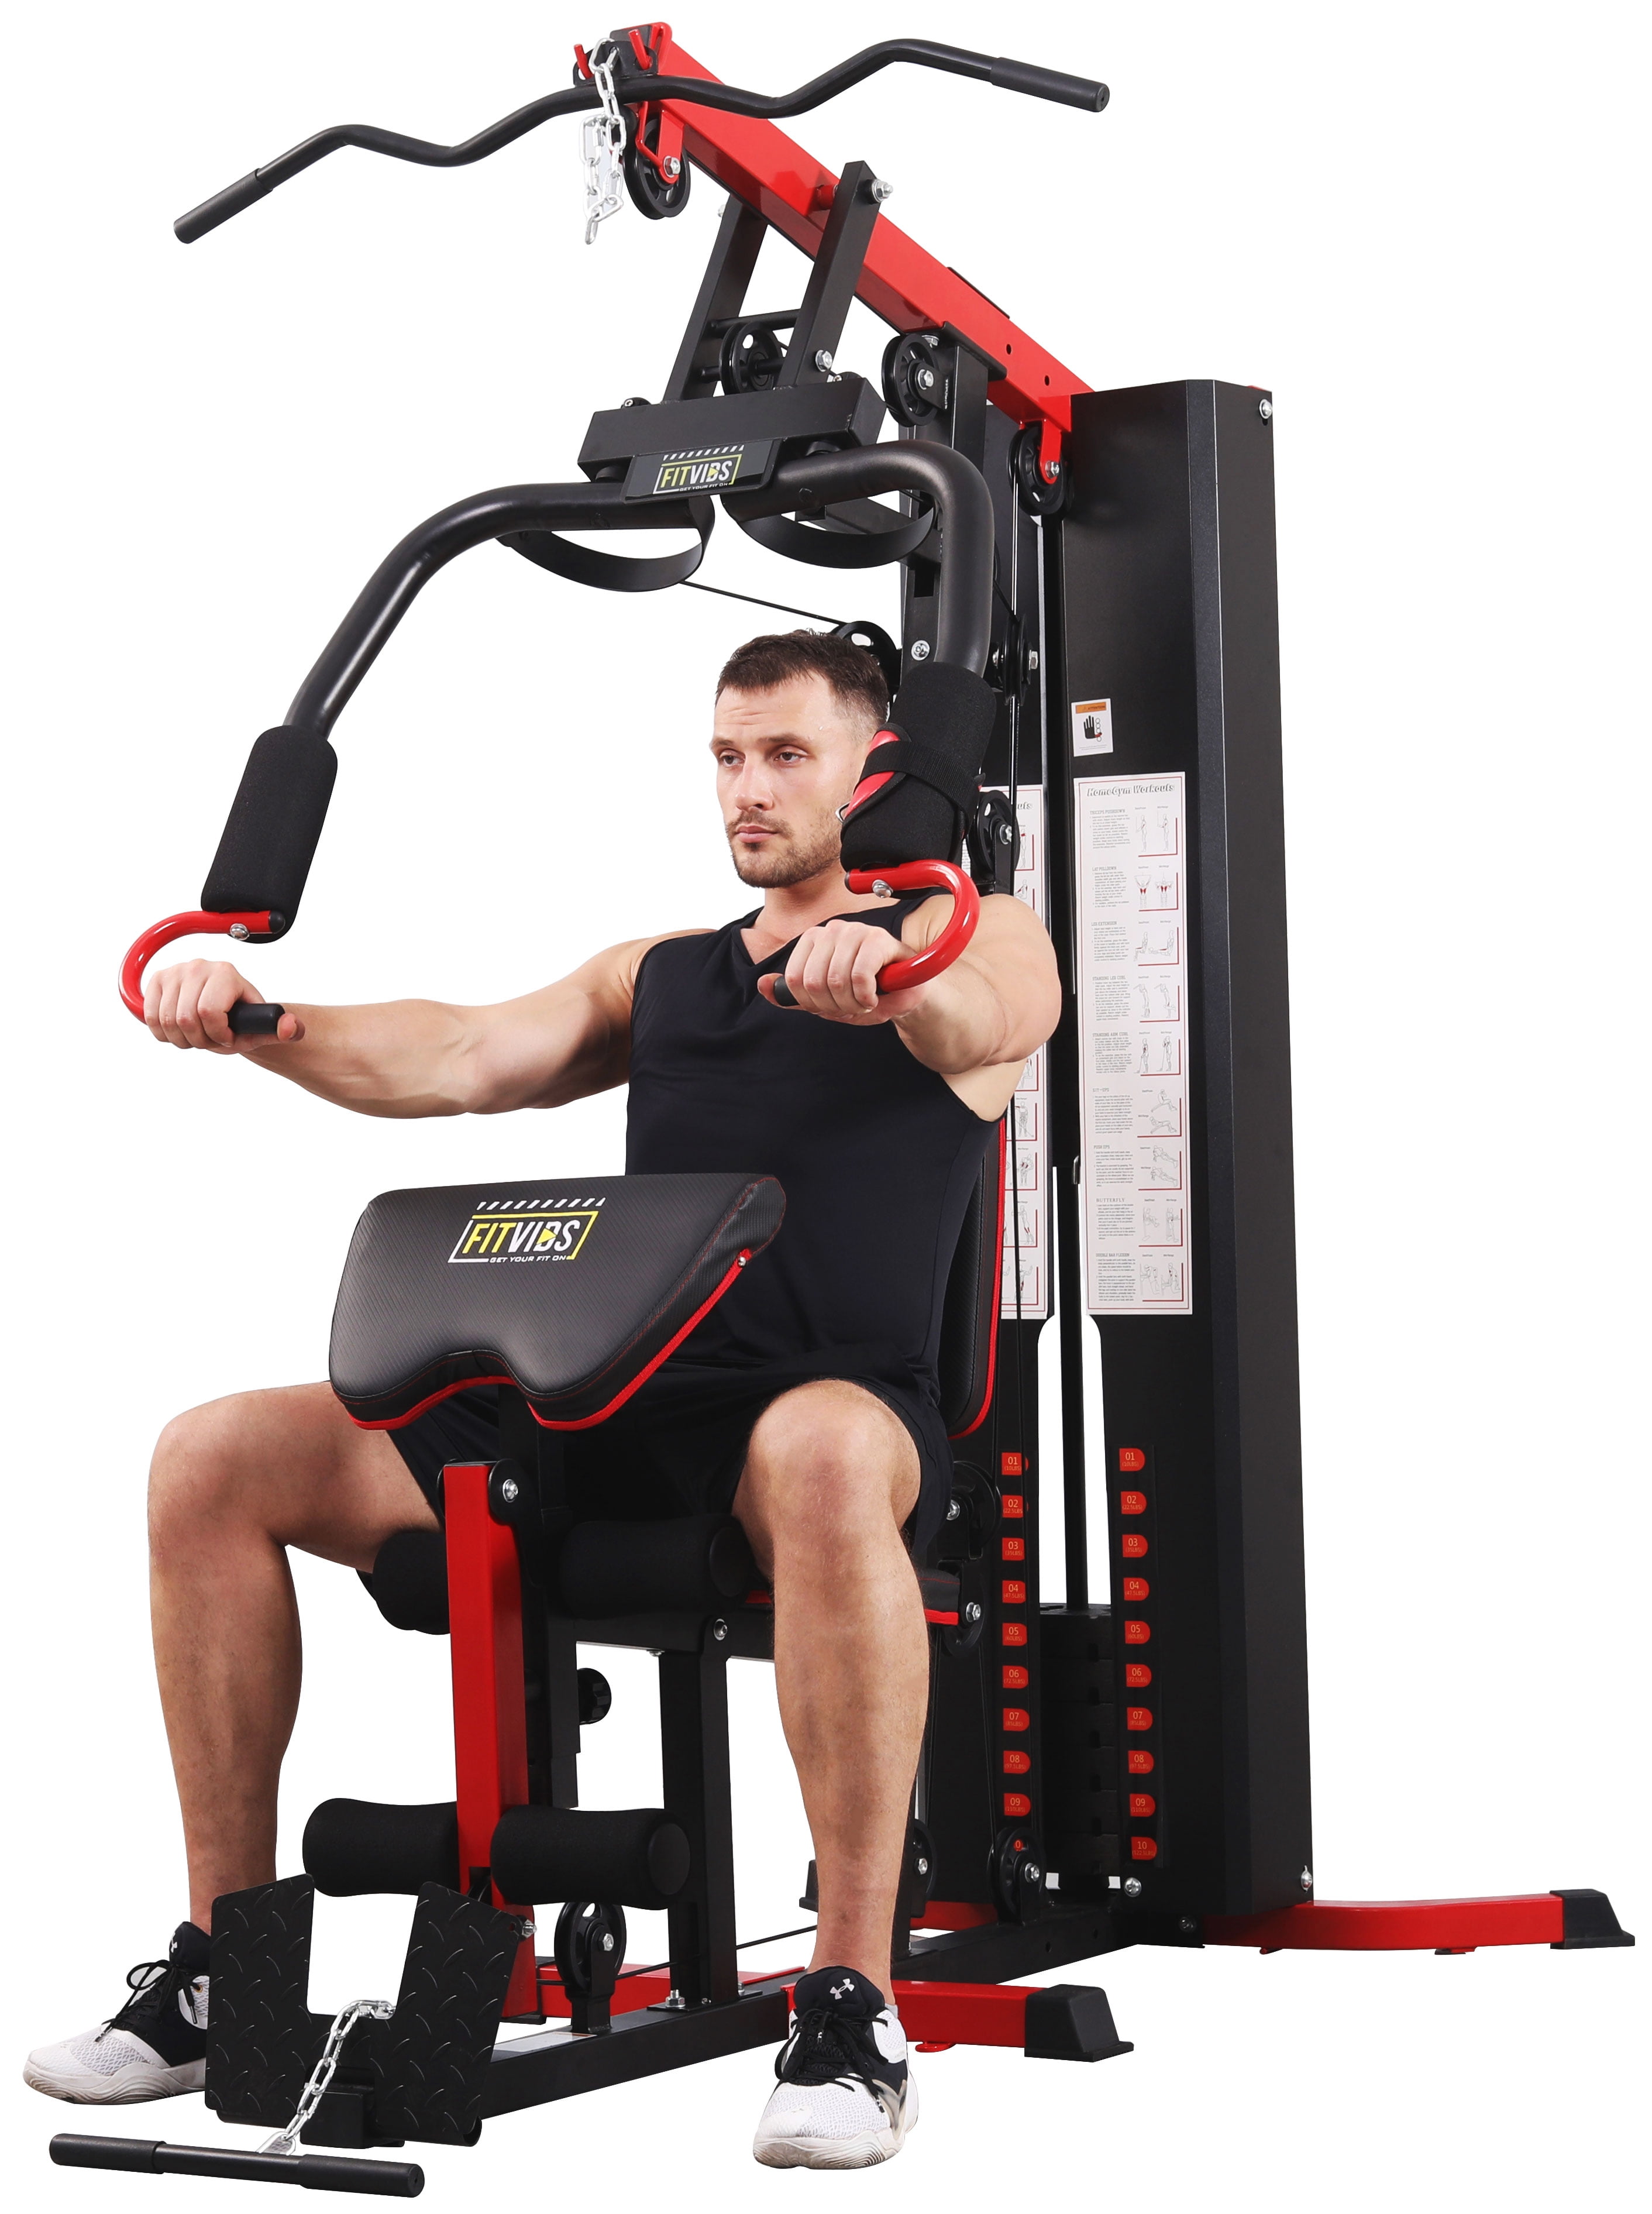 Fitvids LX750 Home Gym System Workout Station with 330 Lbs of